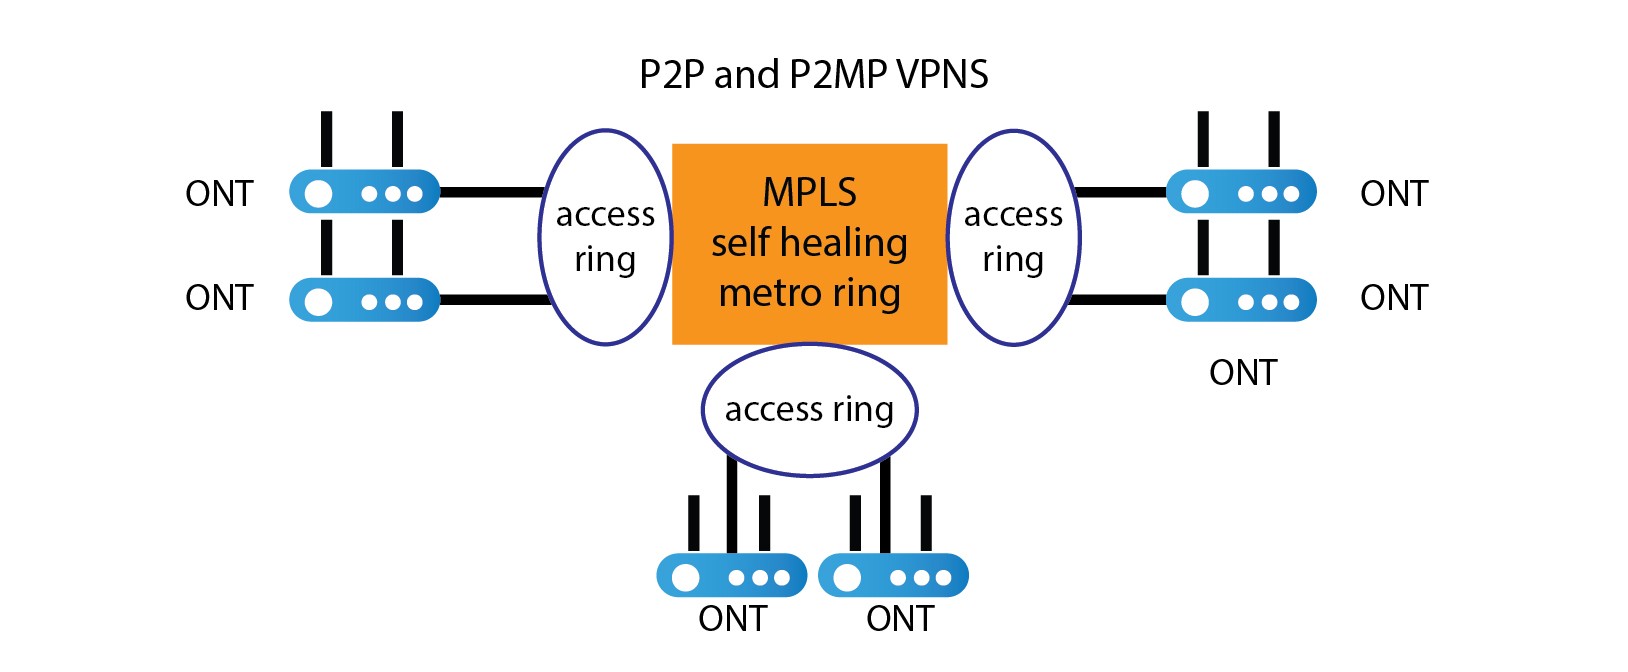 P2P and P2MP VPNS